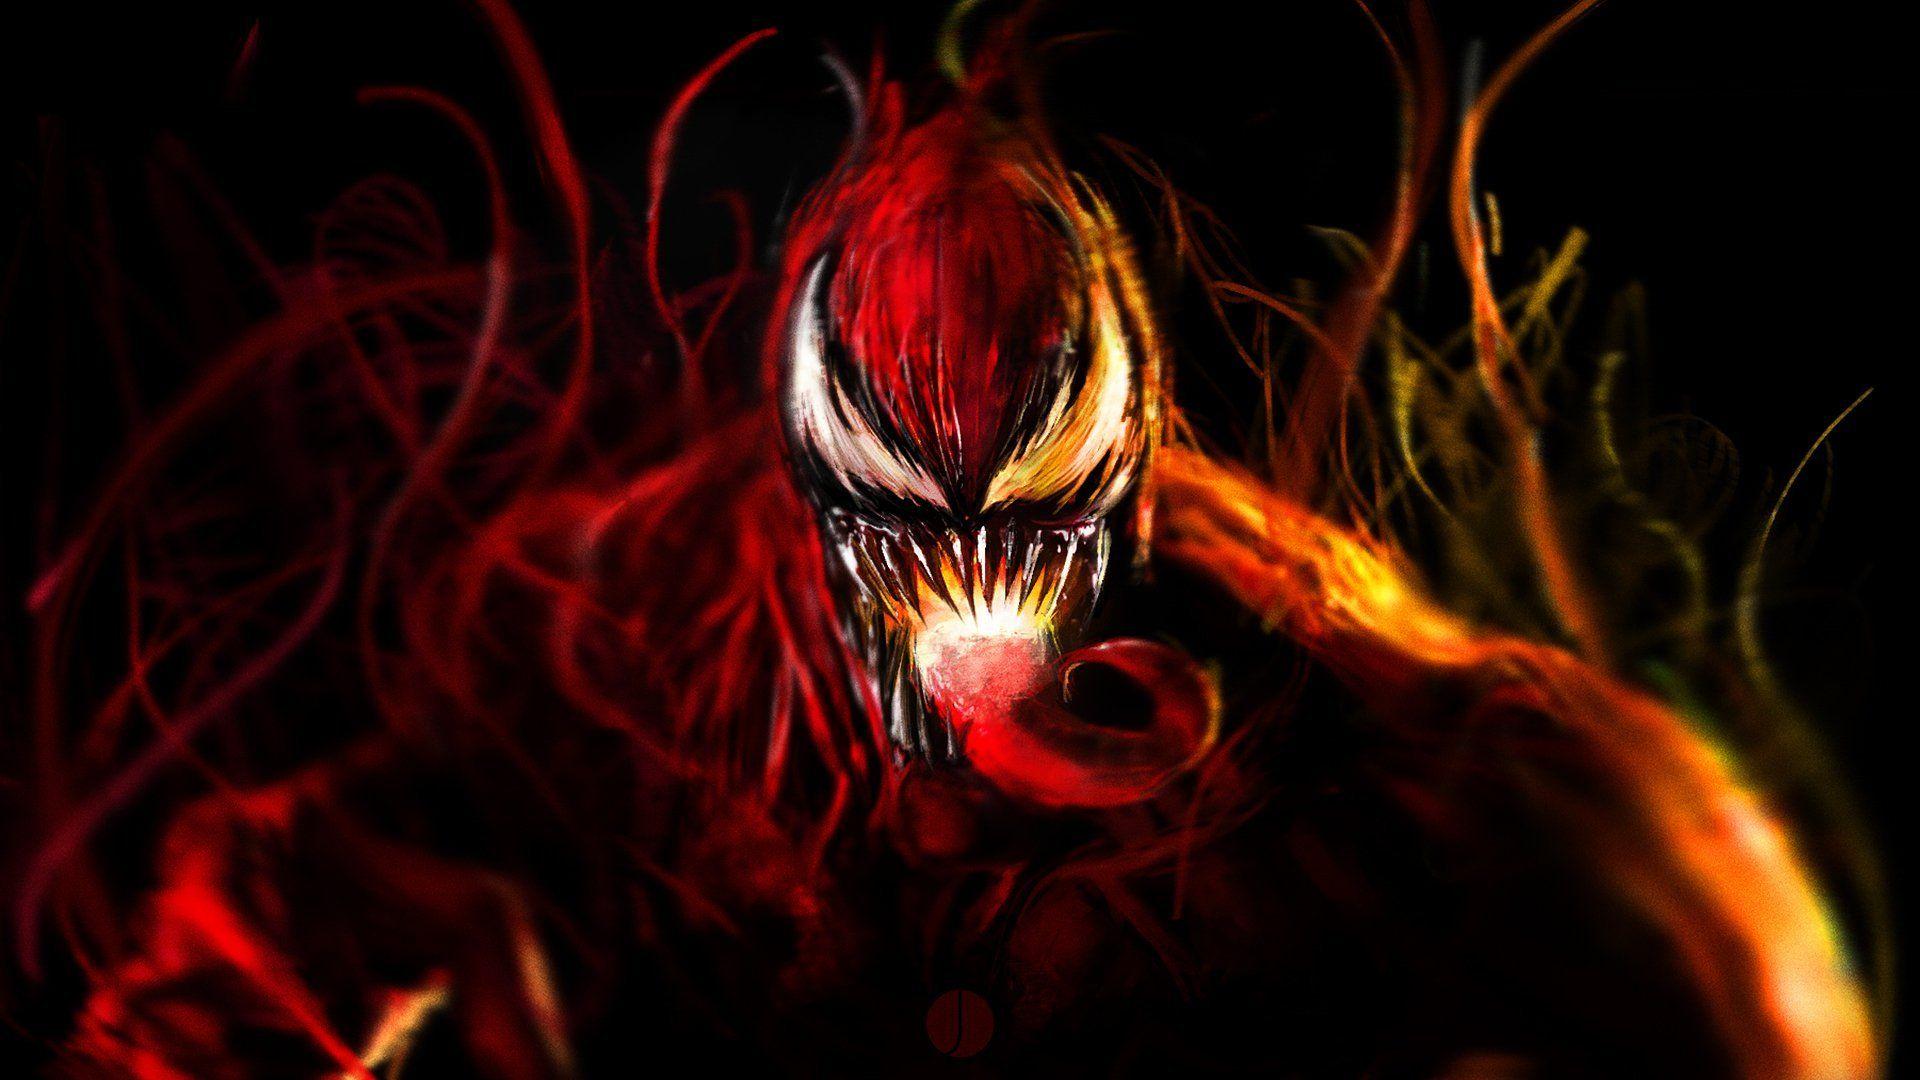 Red Venom Wallpapers - Wallpaper Cave